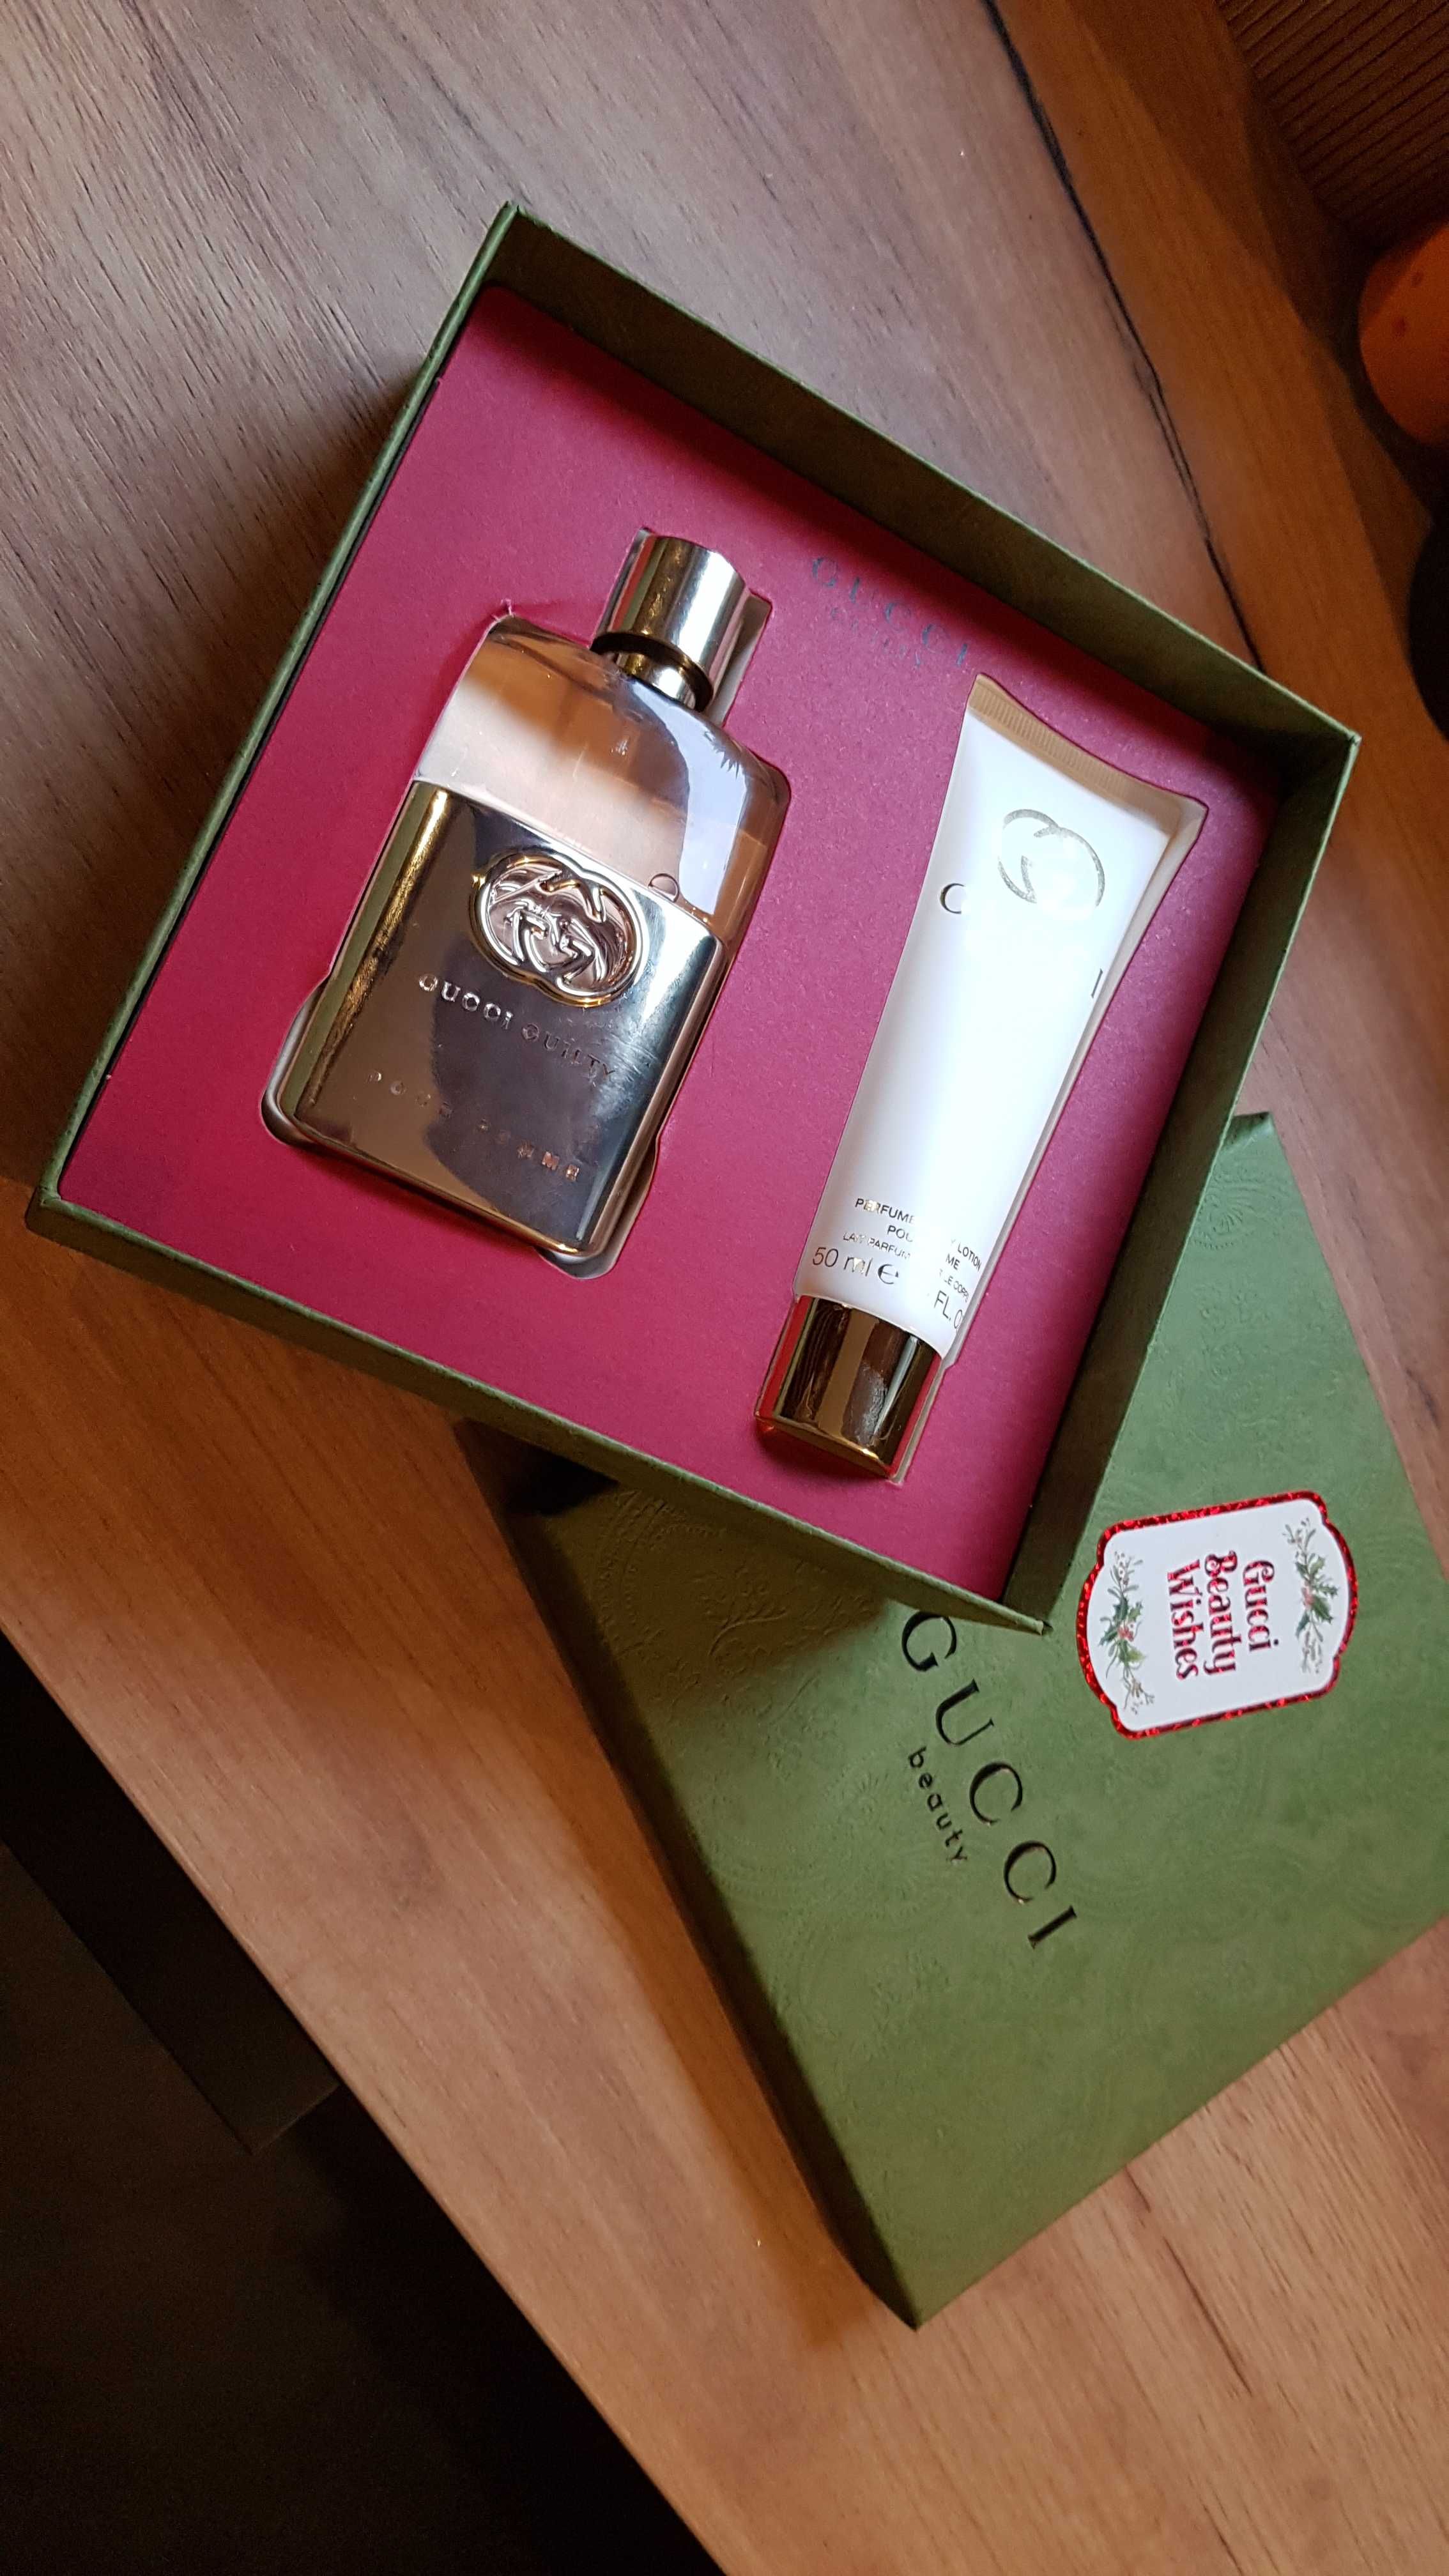 Perfumy Gucci Pour Femme + balsam 50 ml